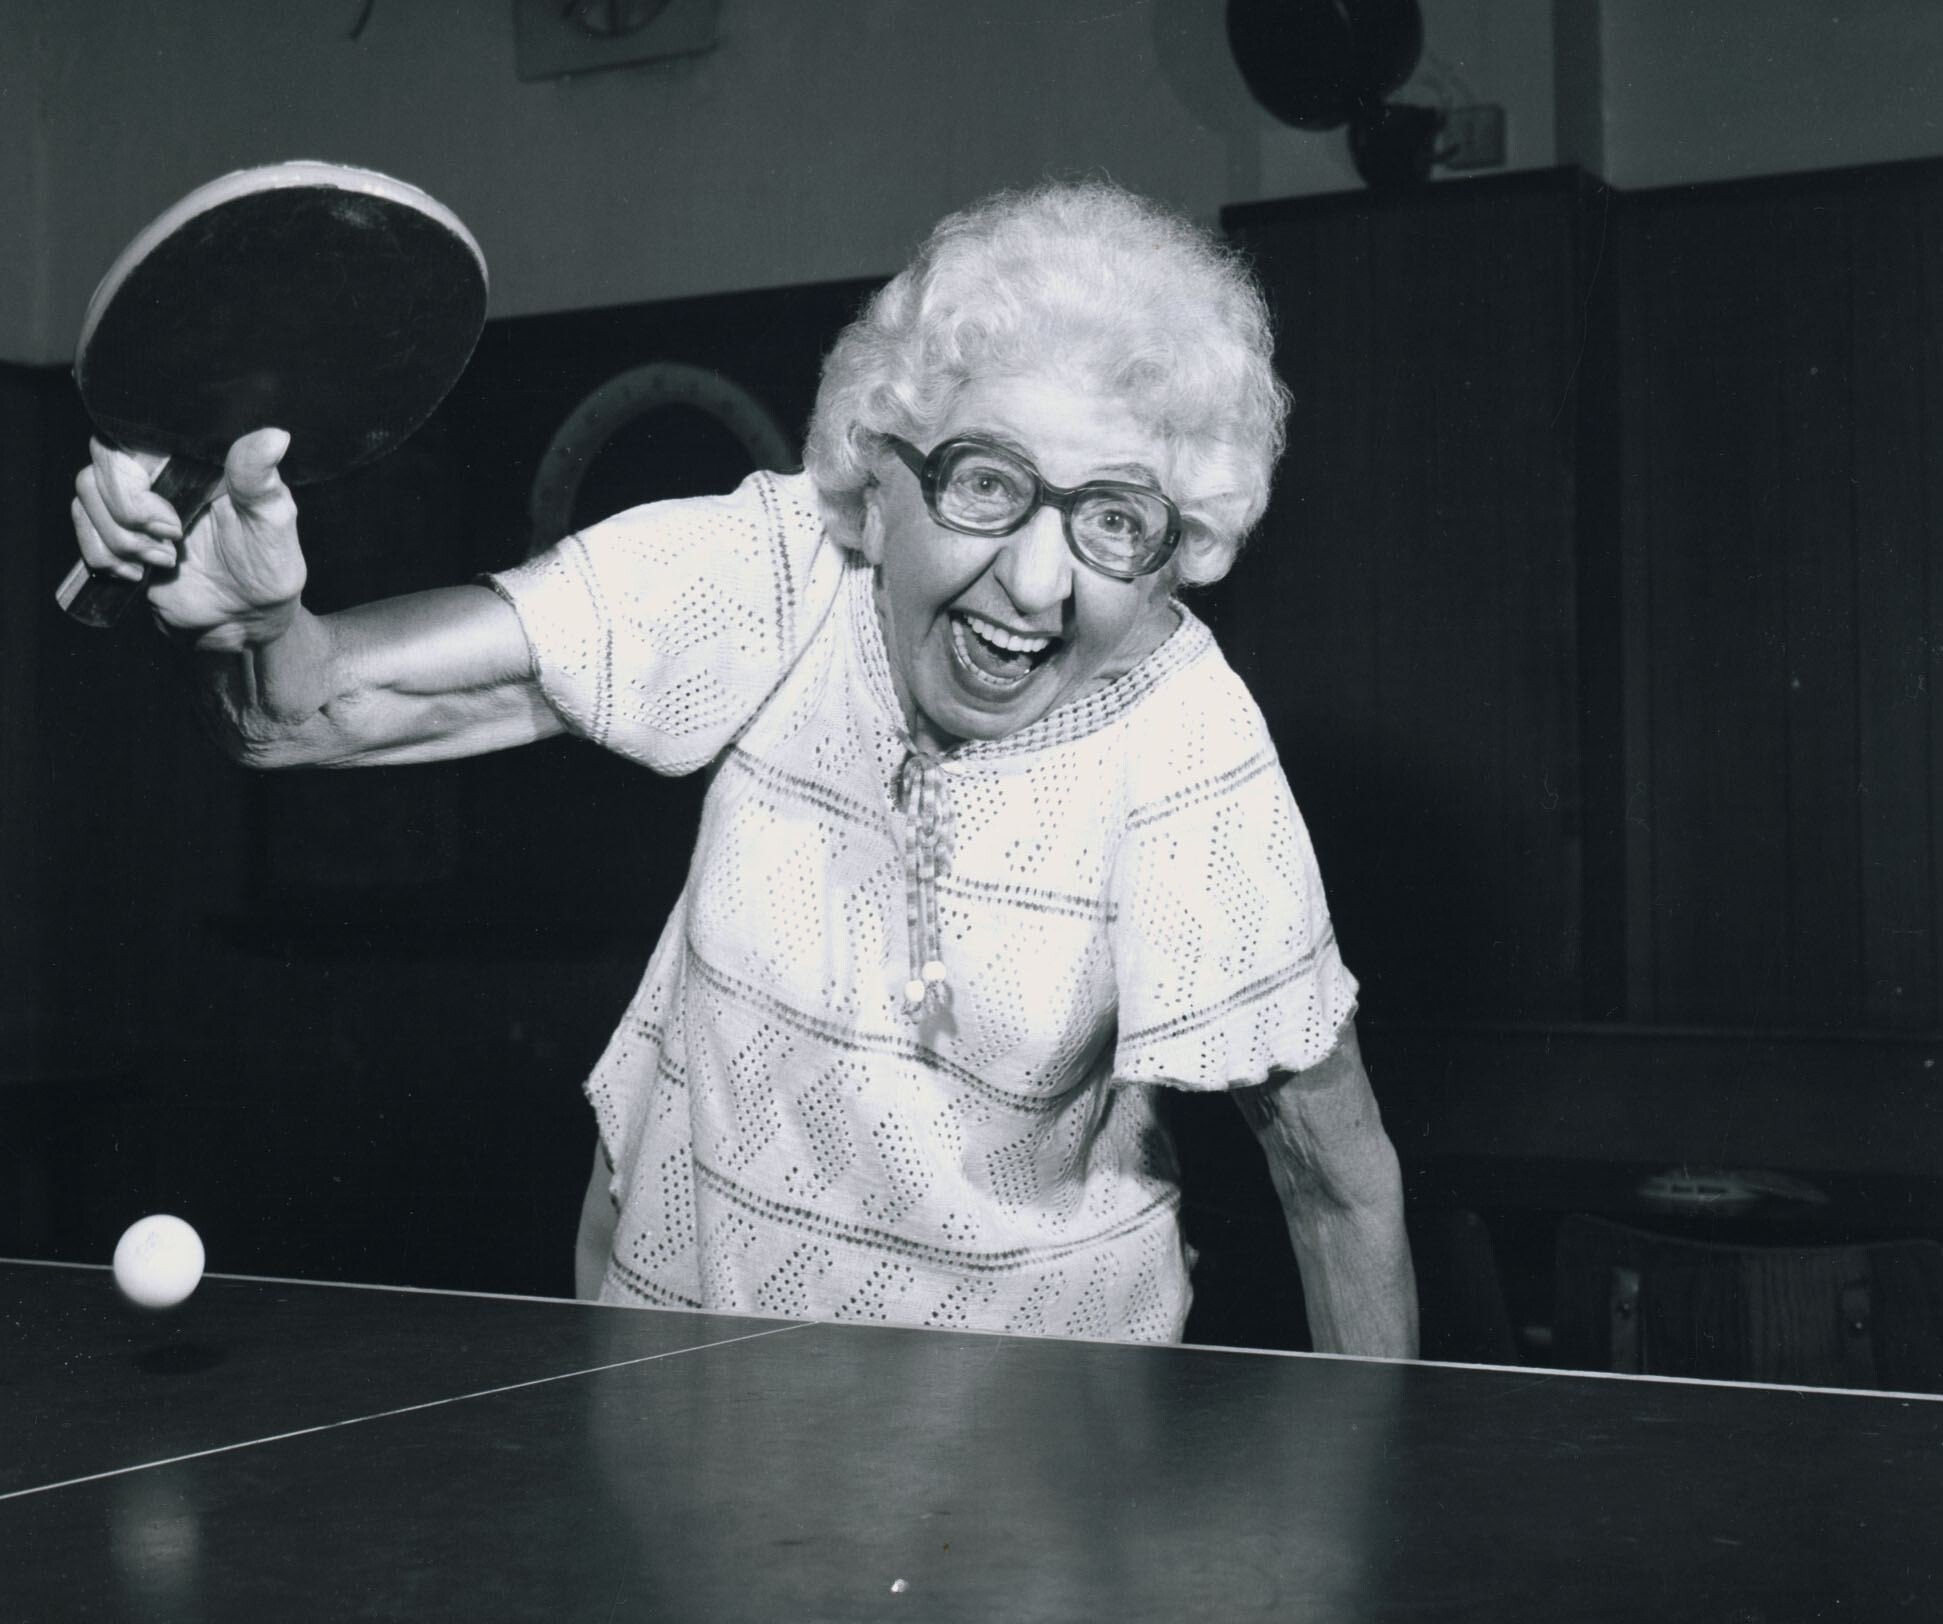 Table tennis can help in the fight against Parkinson’s disease. Photo: Sunday People/Mirrorpix/Getty Images